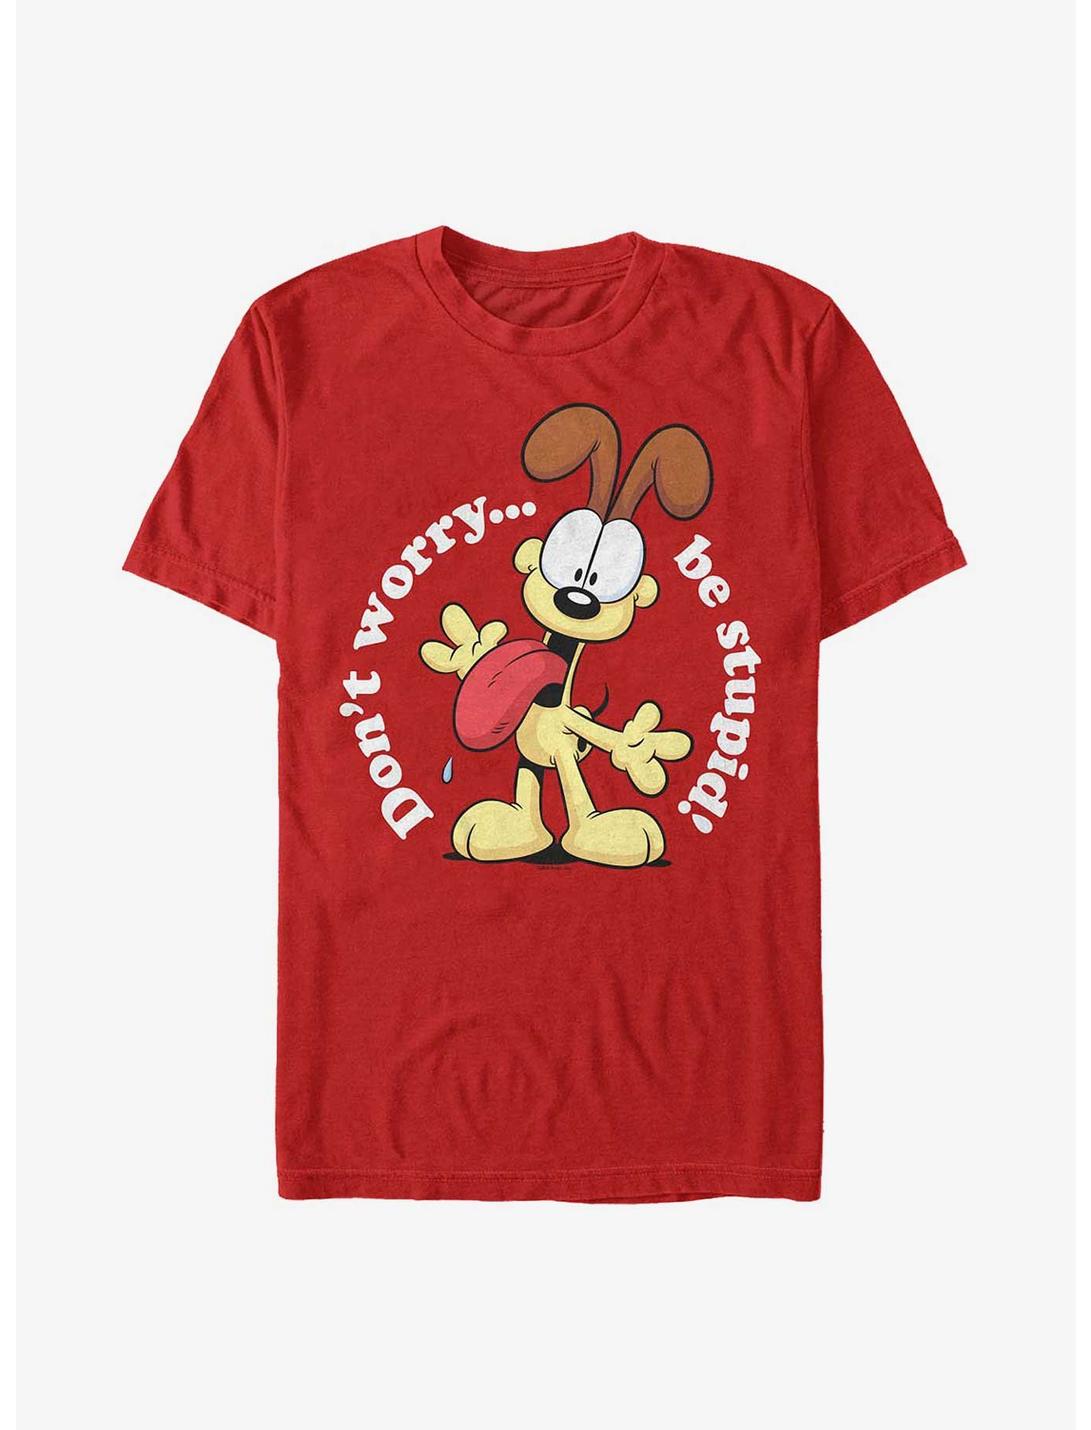 Garfield Odie Be Stupid T-Shirt, RED, hi-res